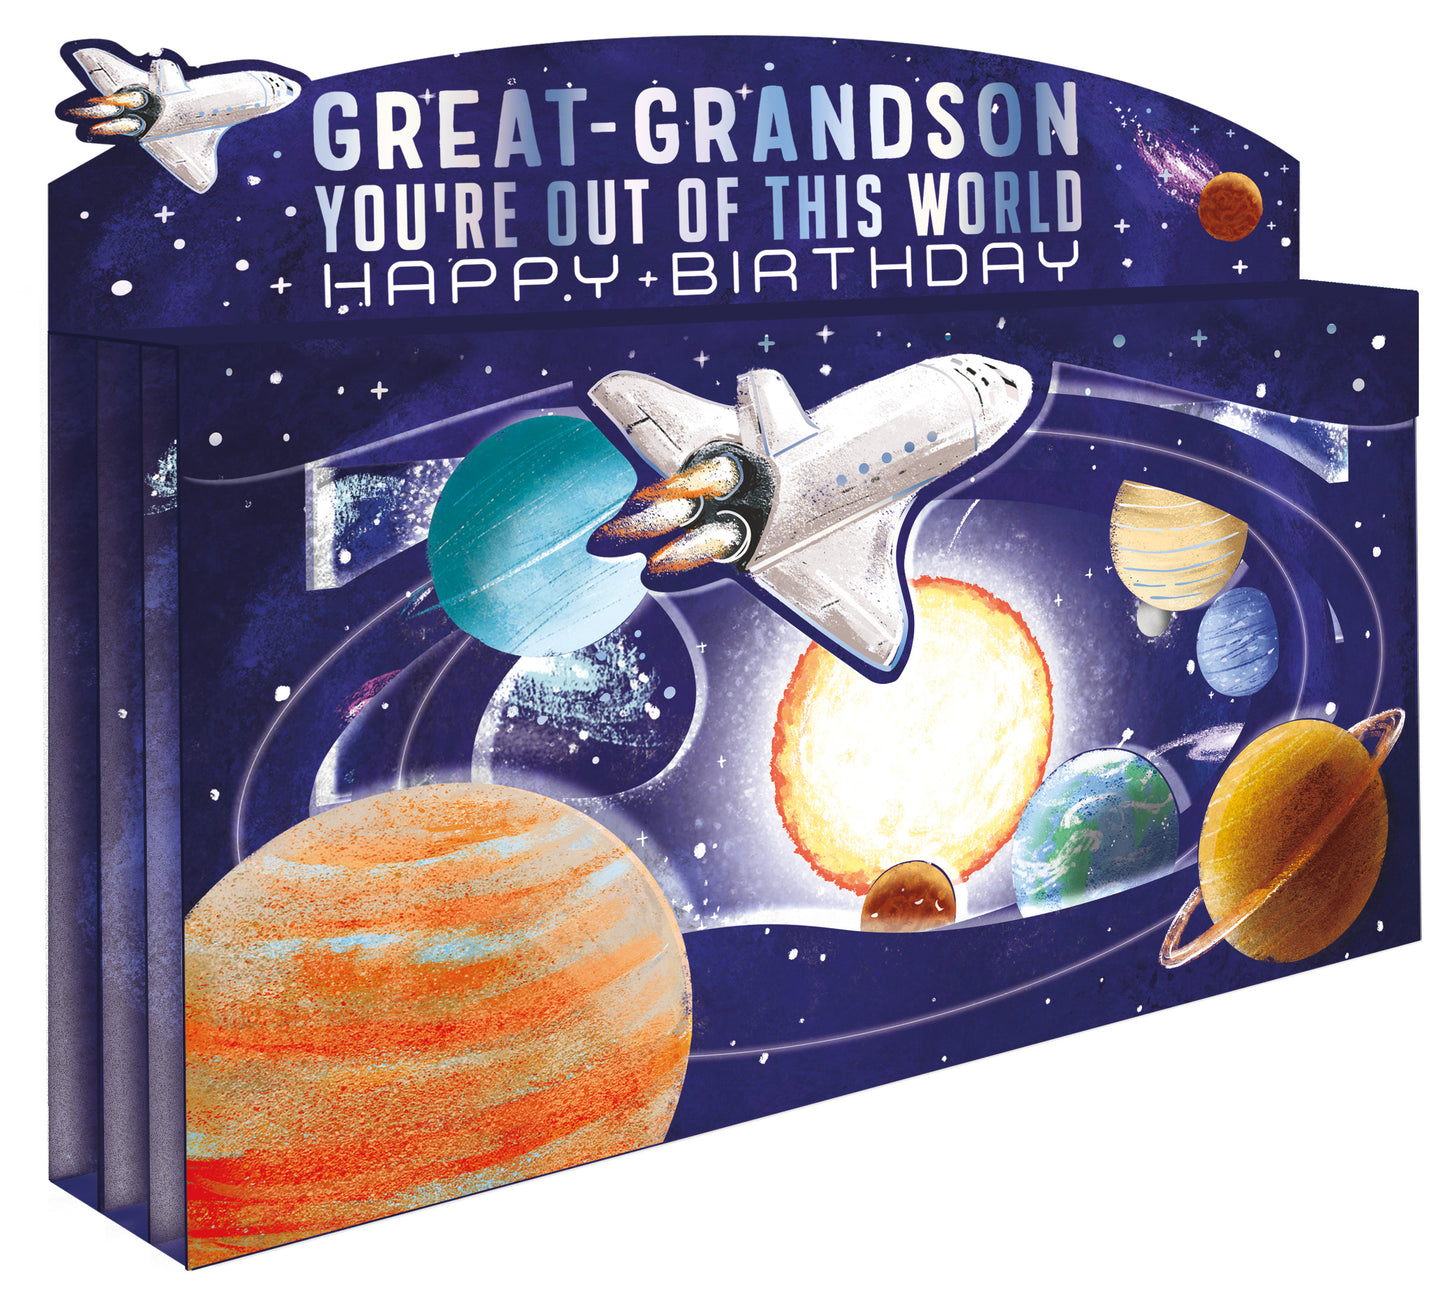 Spectacular 3D Out Of This World Great-Grandson Birthday Card